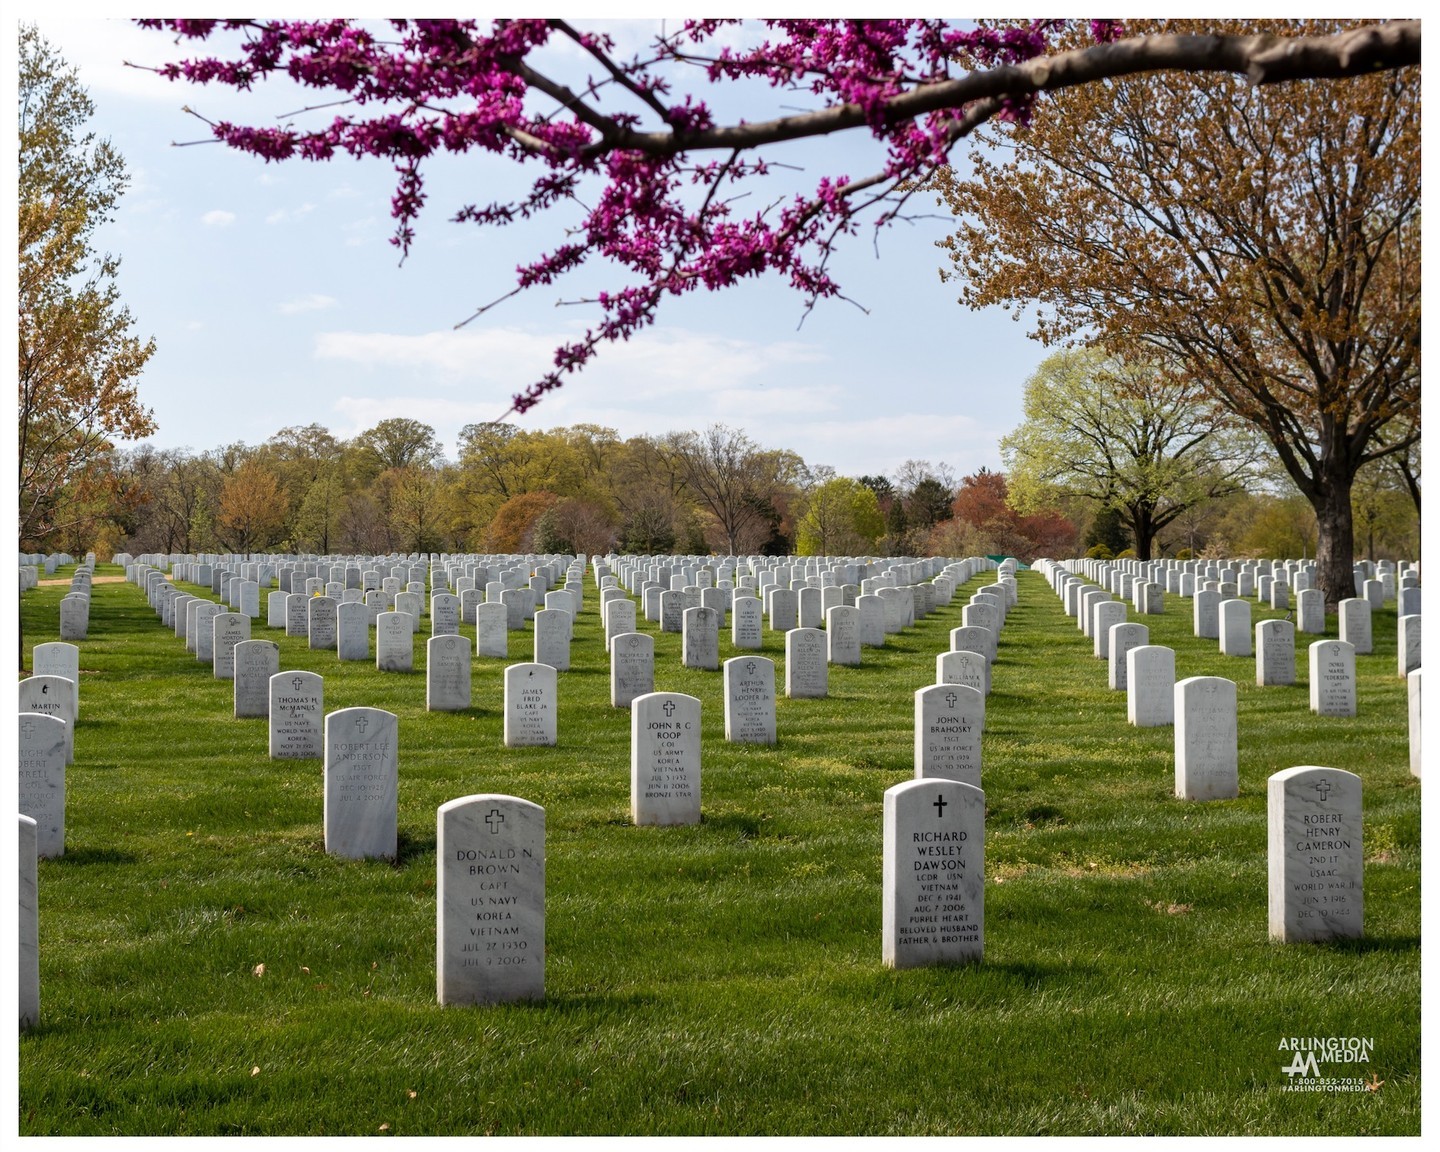 Redbud blossoms appear over Section 66 of Arlington National Cemetery.